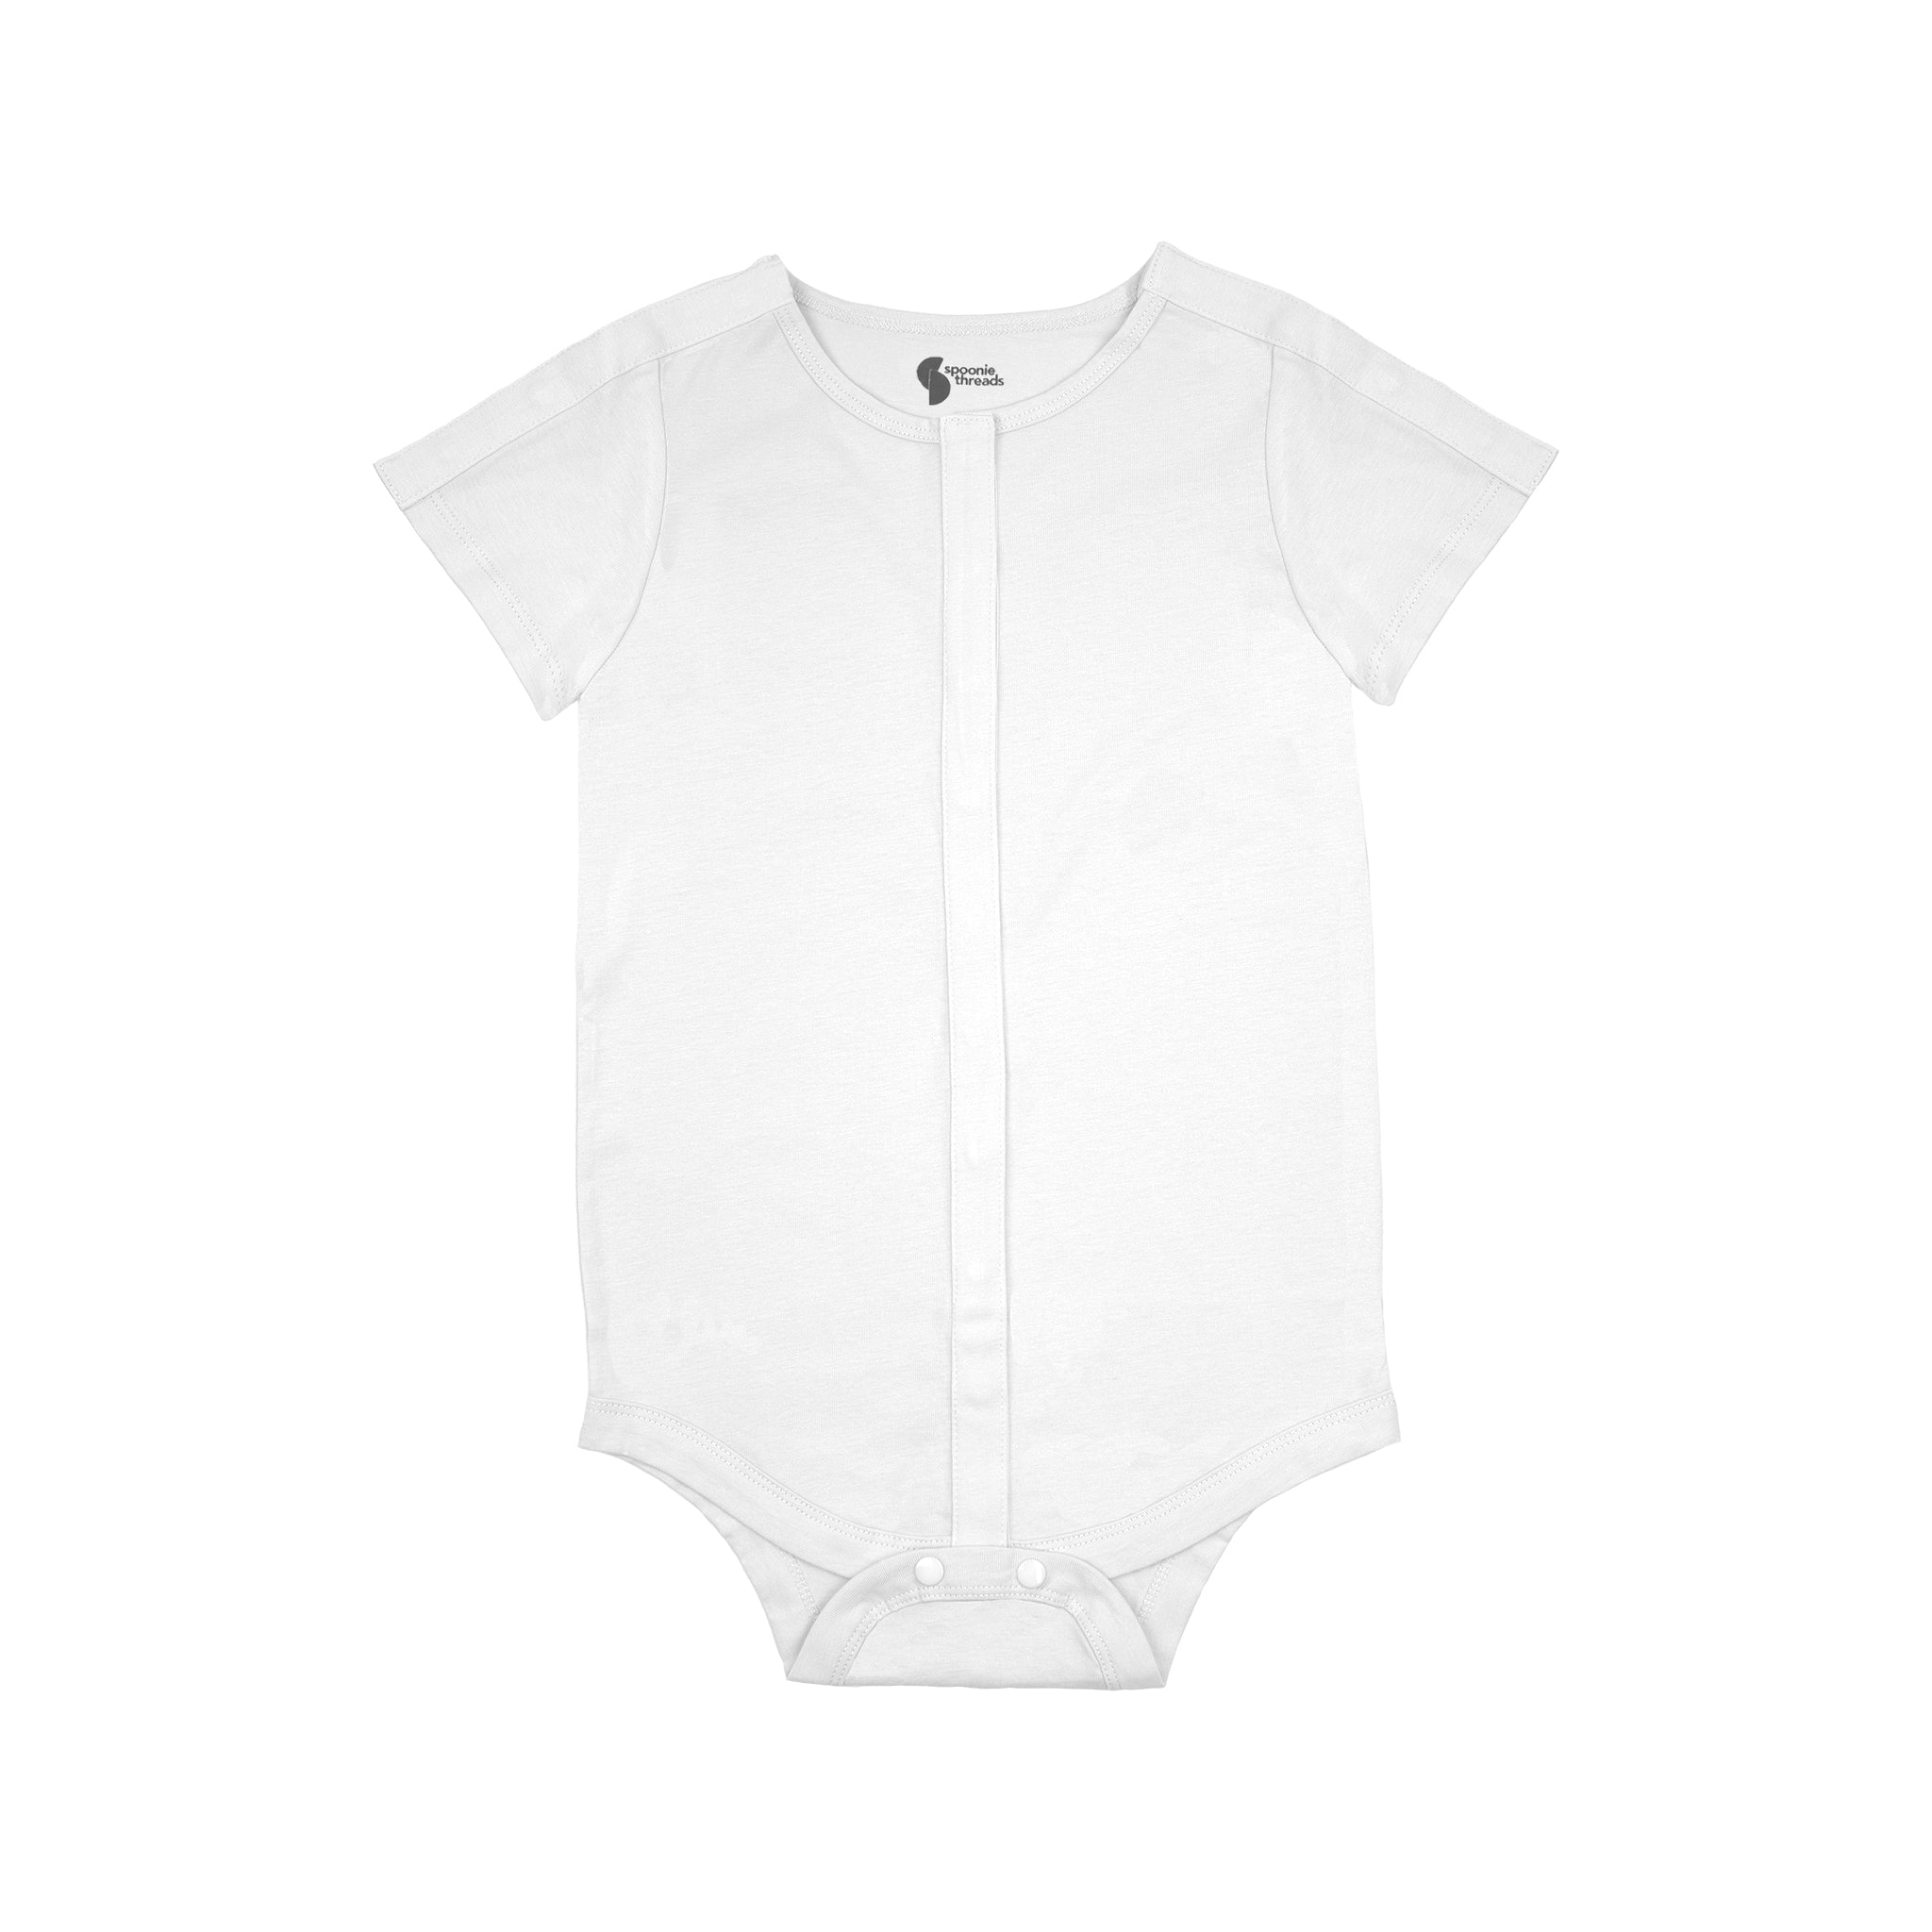  inktastic Uncle's Fishing Buddy Baby Bodysuit Newborn 0020  White 2ac86: Clothing, Shoes & Jewelry